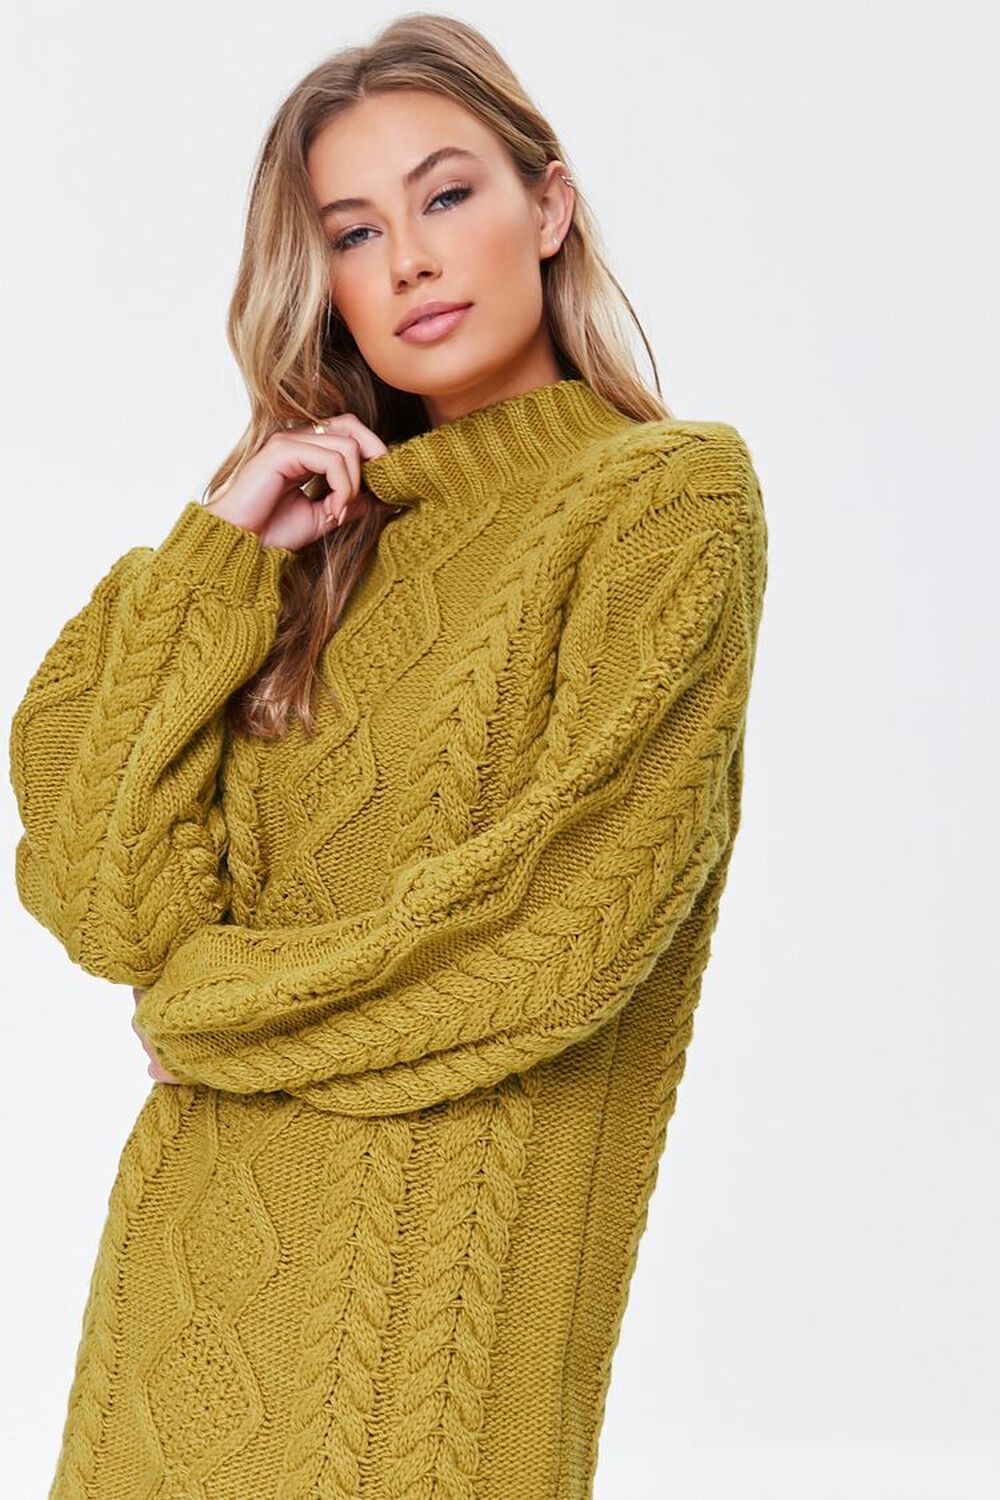 GOLD Cable Knit Sweater Mini Dress, image 1